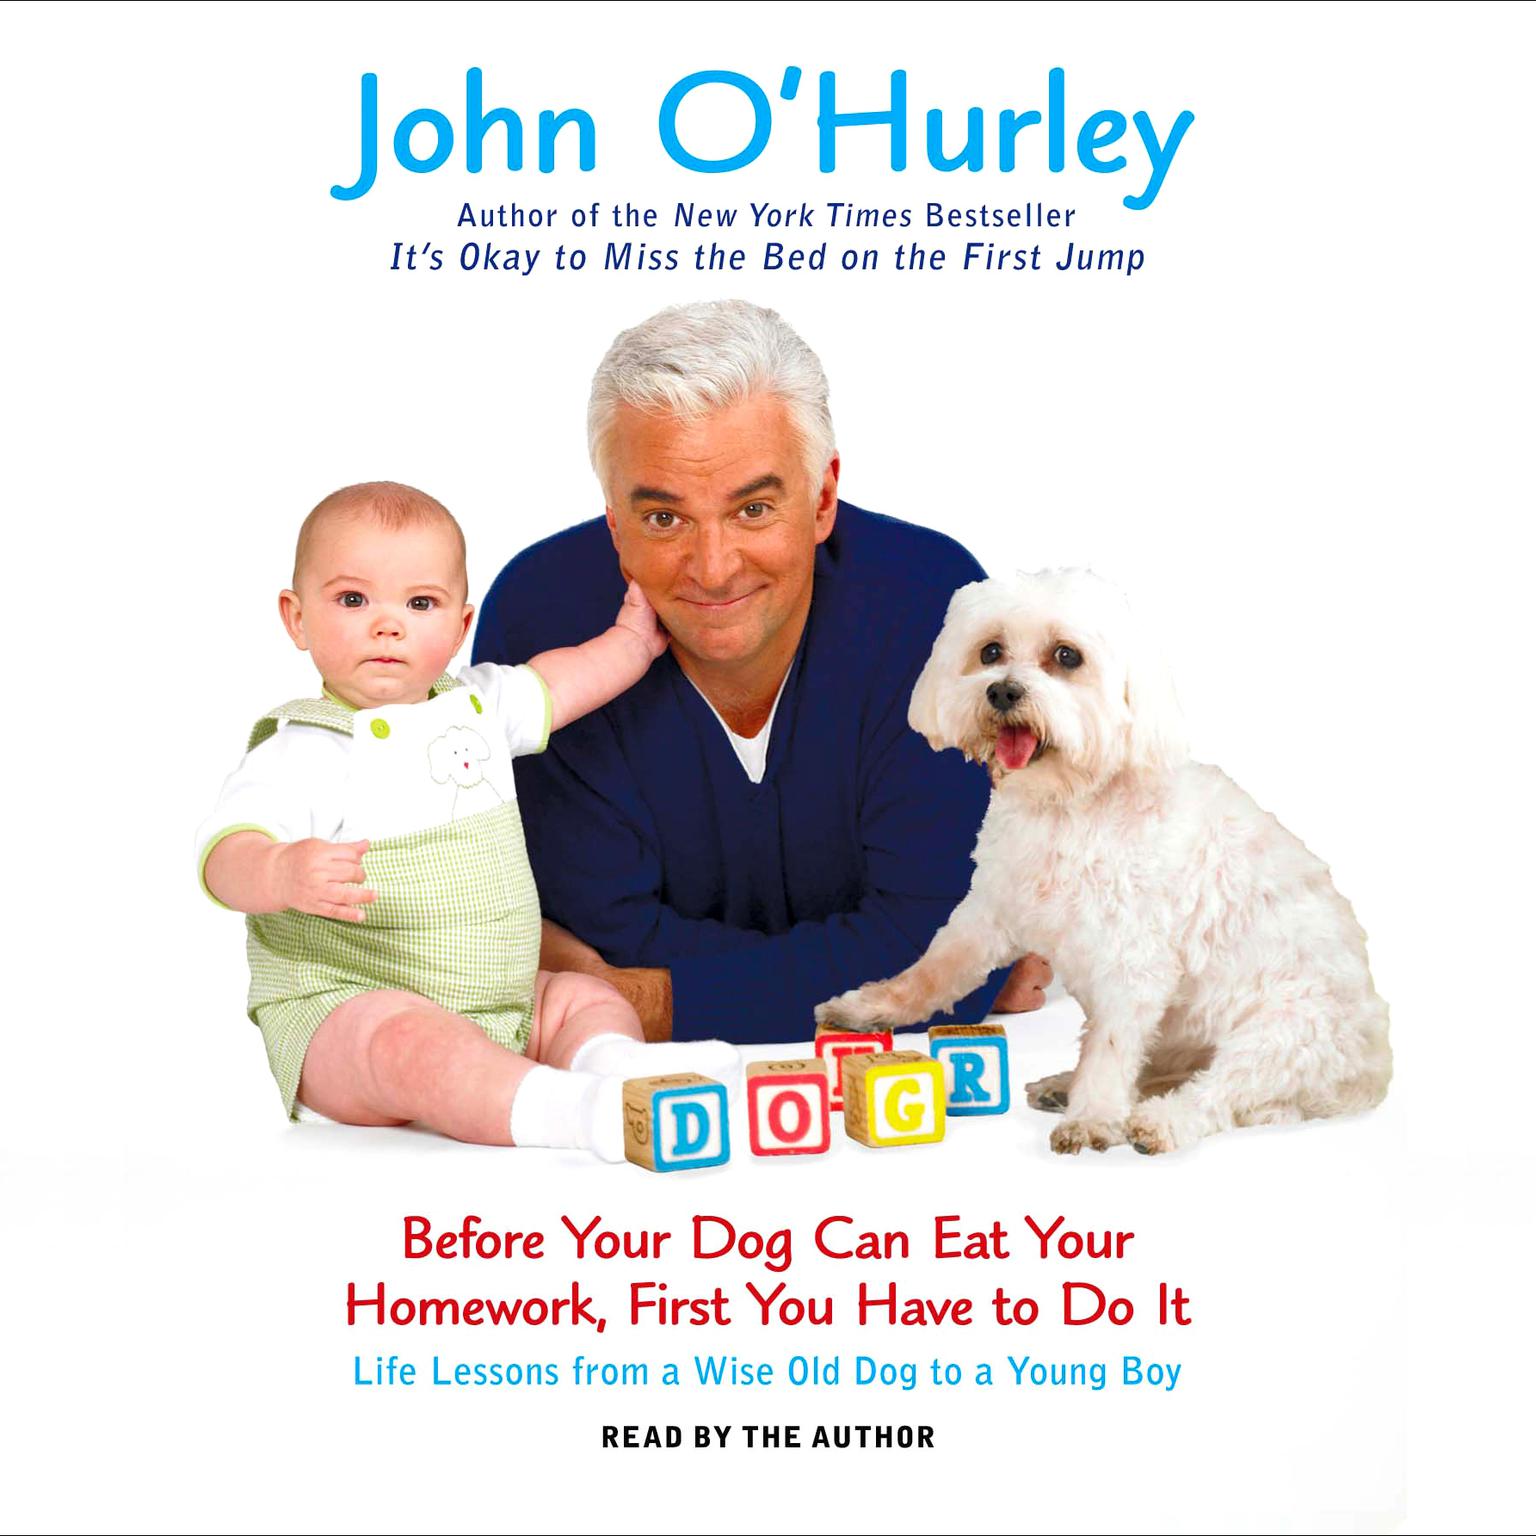 Before Your Dog Can Eat Your Homework, First You Have to Do It: Life Lessons from a Wise Old Dog to a Young Boy Audiobook, by John O'Hurley